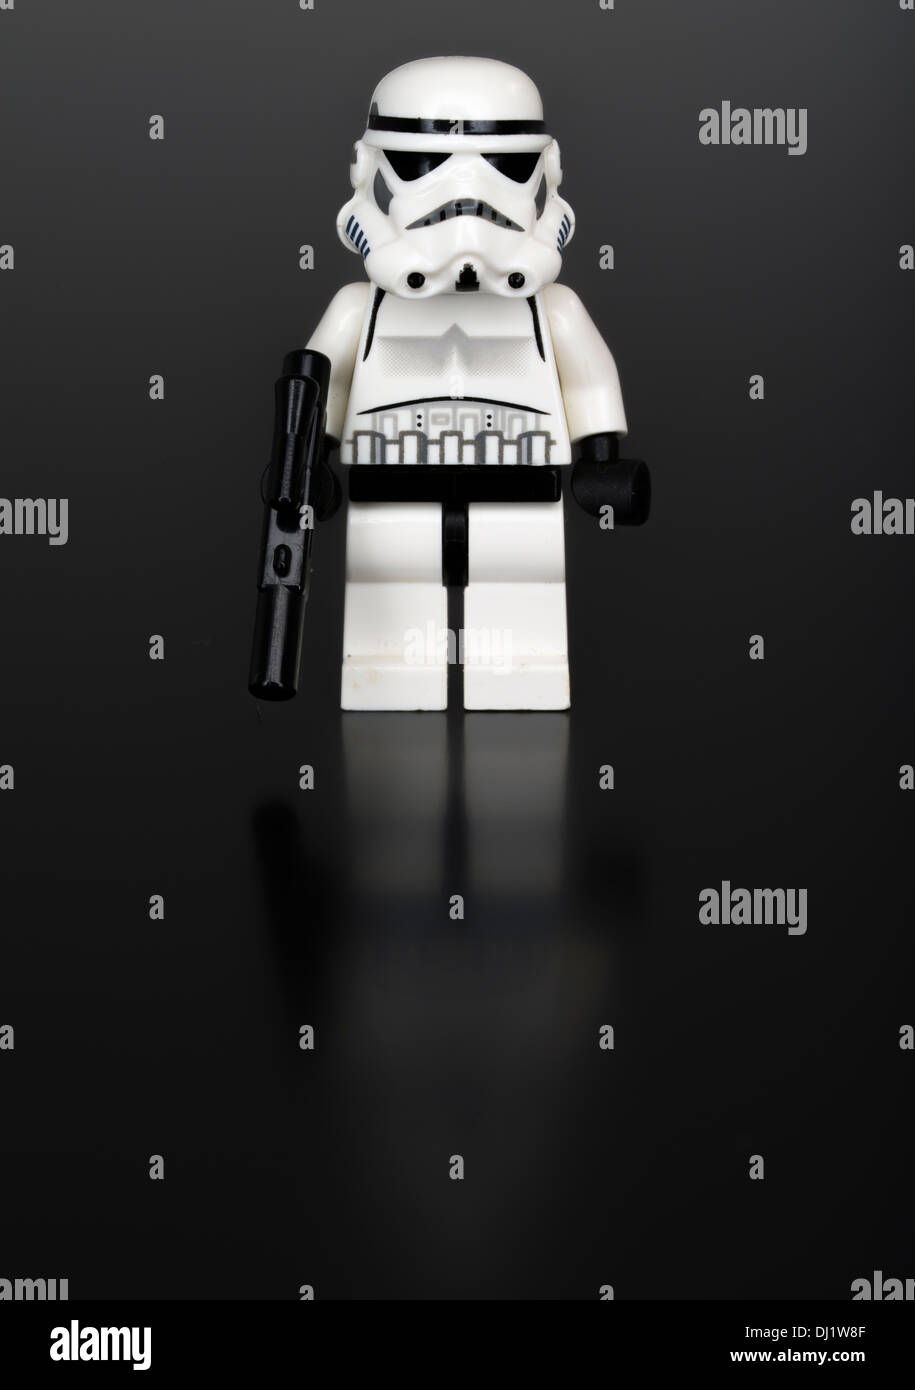 Lego Star Wars Minifigure  Storm Troopers Stock Photo